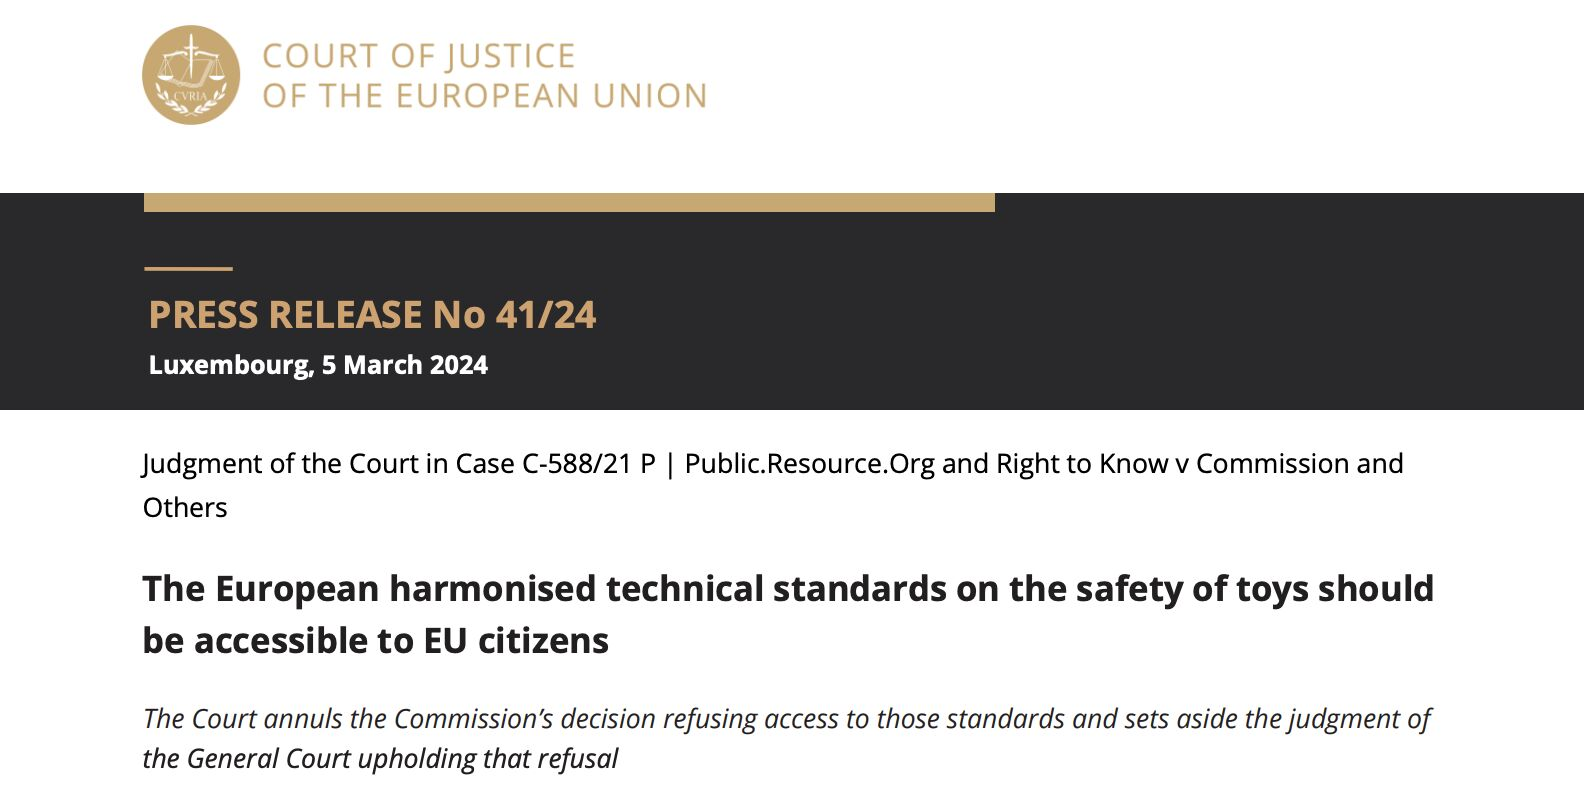 Screenshot of the judgment of the Court of Justice of the European Union in Case C-588/21 P about the accessibility of technical standards to EU citizens